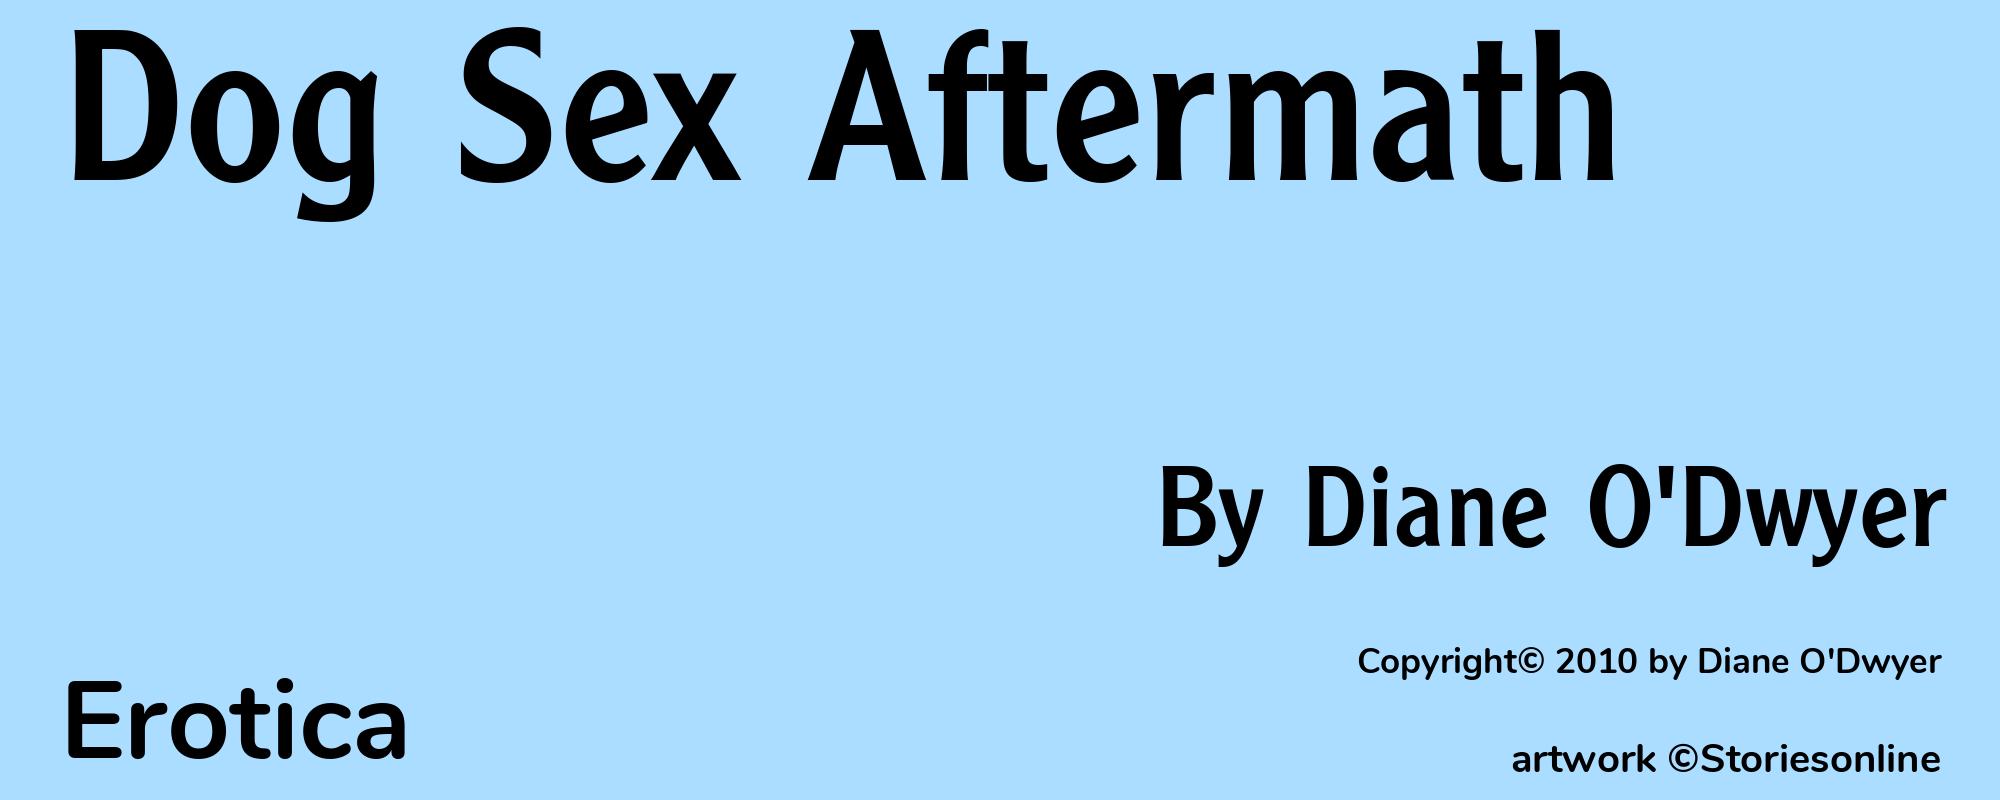 Dog Sex Aftermath - Cover